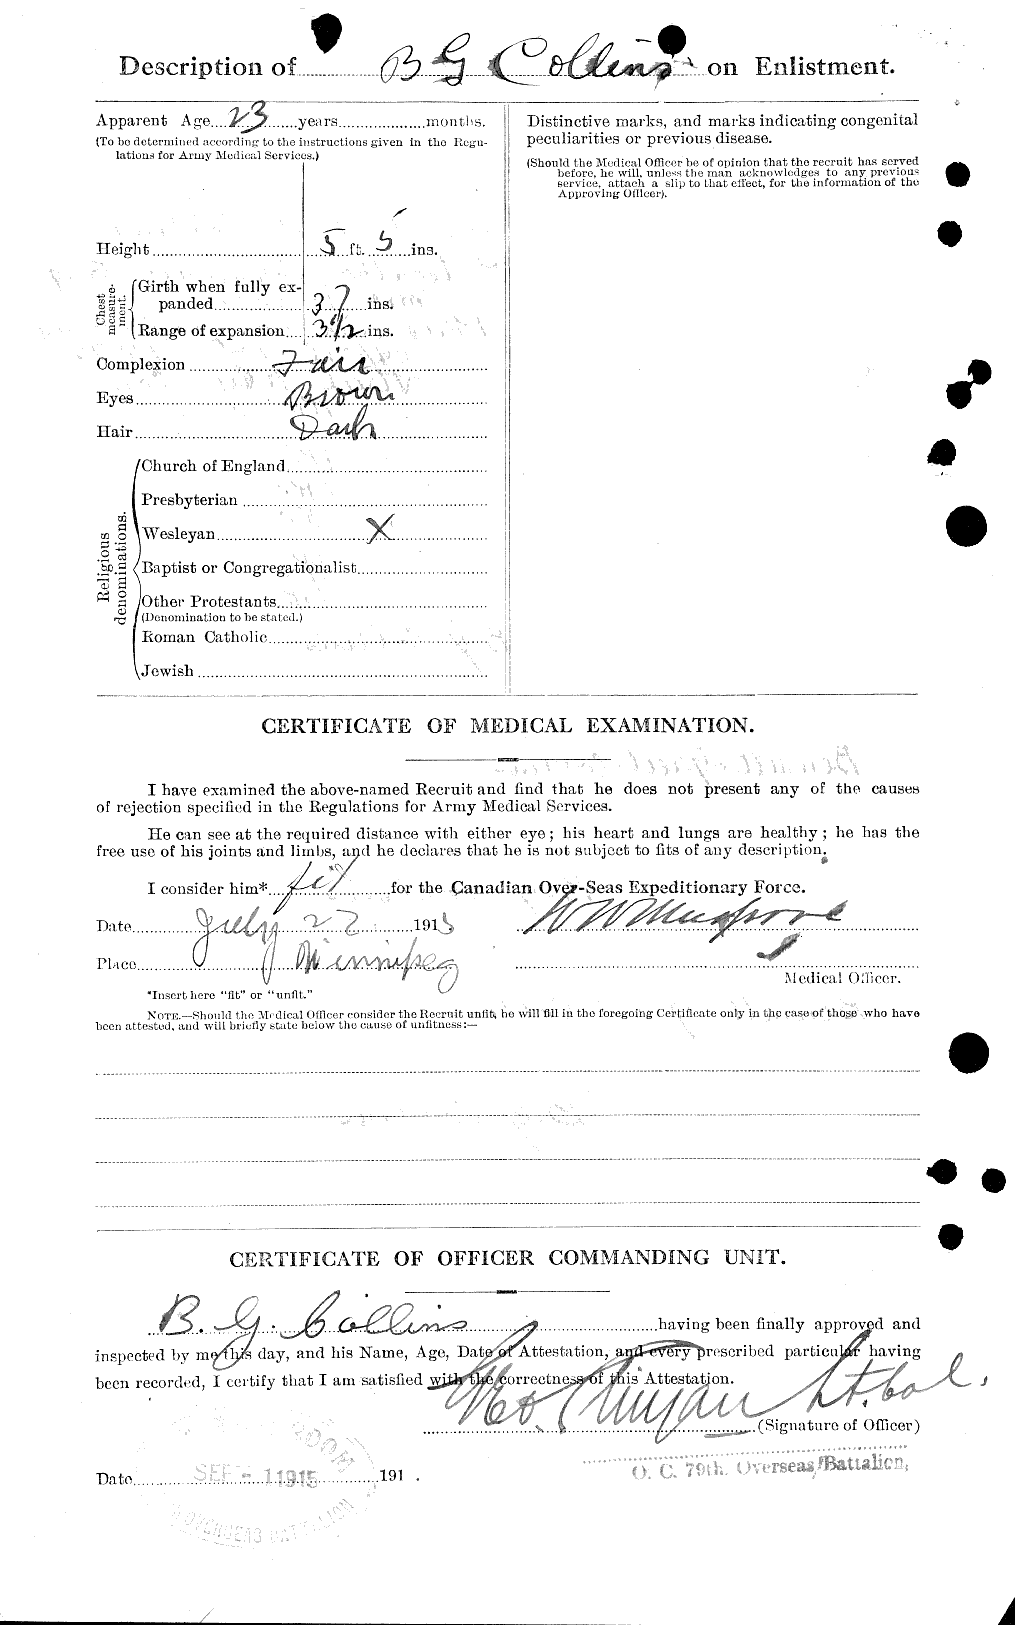 Personnel Records of the First World War - CEF 028993b